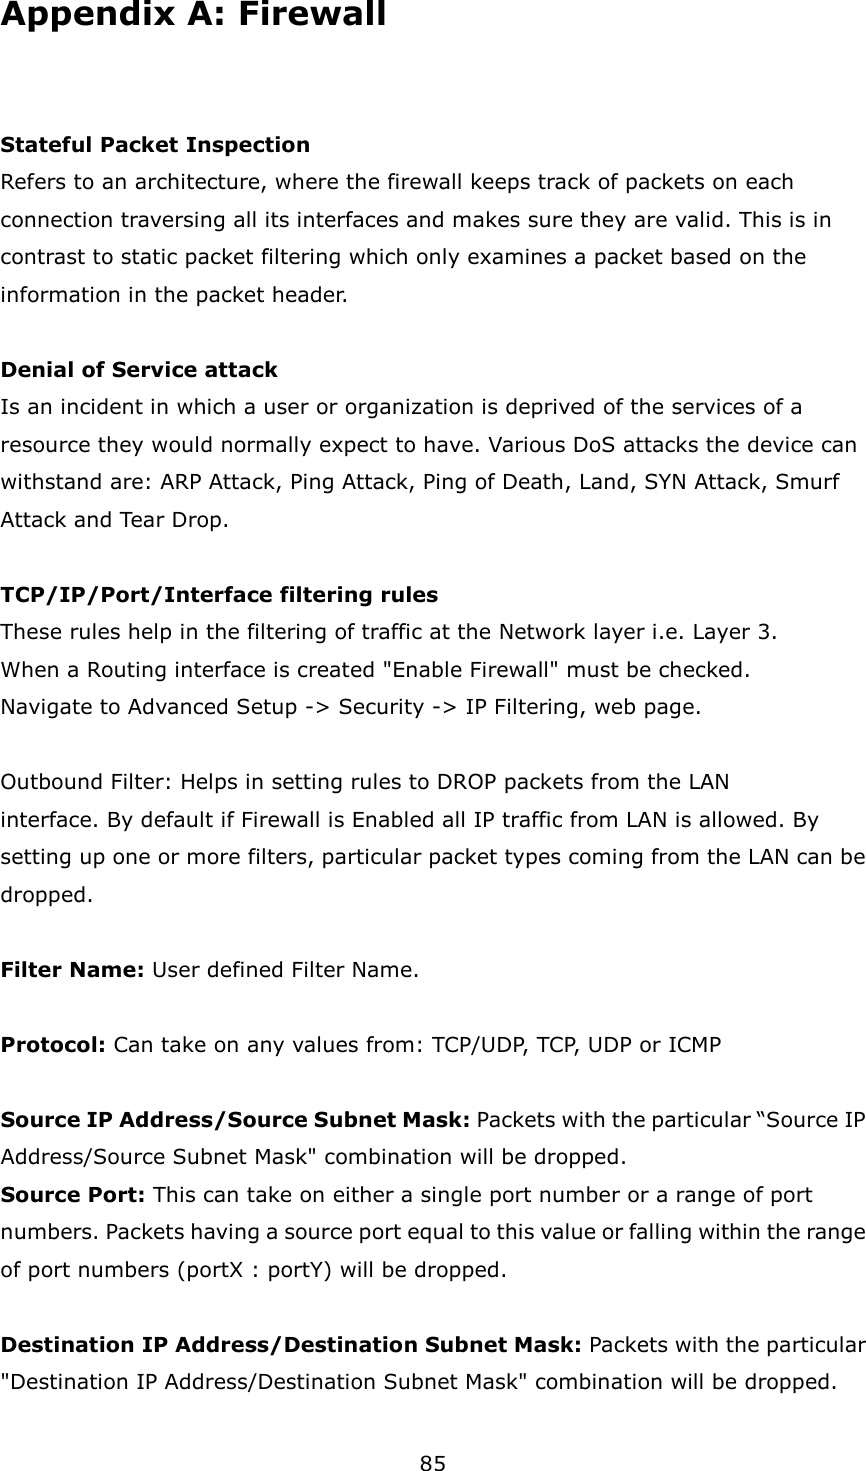 85 Appendix A: Firewall  Stateful Packet Inspection Refers to an architecture, where the firewall keeps track of packets on each connection traversing all its interfaces and makes sure they are valid. This is in contrast to static packet filtering which only examines a packet based on the information in the packet header.    Denial of Service attack Is an incident in which a user or organization is deprived of the services of a resource they would normally expect to have. Various DoS attacks the device can withstand are: ARP Attack, Ping Attack, Ping of Death, Land, SYN Attack, Smurf Attack and Tear Drop.    TCP/IP/Port/Interface filtering rules These rules help in the filtering of traffic at the Network layer i.e. Layer 3. When a Routing interface is created &quot;Enable Firewall&quot; must be checked. Navigate to Advanced Setup -&gt; Security -&gt; IP Filtering, web page.    Outbound Filter: Helps in setting rules to DROP packets from the LAN   interface. By default if Firewall is Enabled all IP traffic from LAN is allowed. By setting up one or more filters, particular packet types coming from the LAN can be dropped.    Filter Name: User defined Filter Name.    Protocol: Can take on any values from: TCP/UDP, TCP, UDP or ICMP  Source IP Address/Source Subnet Mask: Packets with the particular “Source IP Address/Source Subnet Mask&quot; combination will be dropped. Source Port: This can take on either a single port number or a range of port numbers. Packets having a source port equal to this value or falling within the range of port numbers (portX : portY) will be dropped.    Destination IP Address/Destination Subnet Mask: Packets with the particular &quot;Destination IP Address/Destination Subnet Mask&quot; combination will be dropped. 